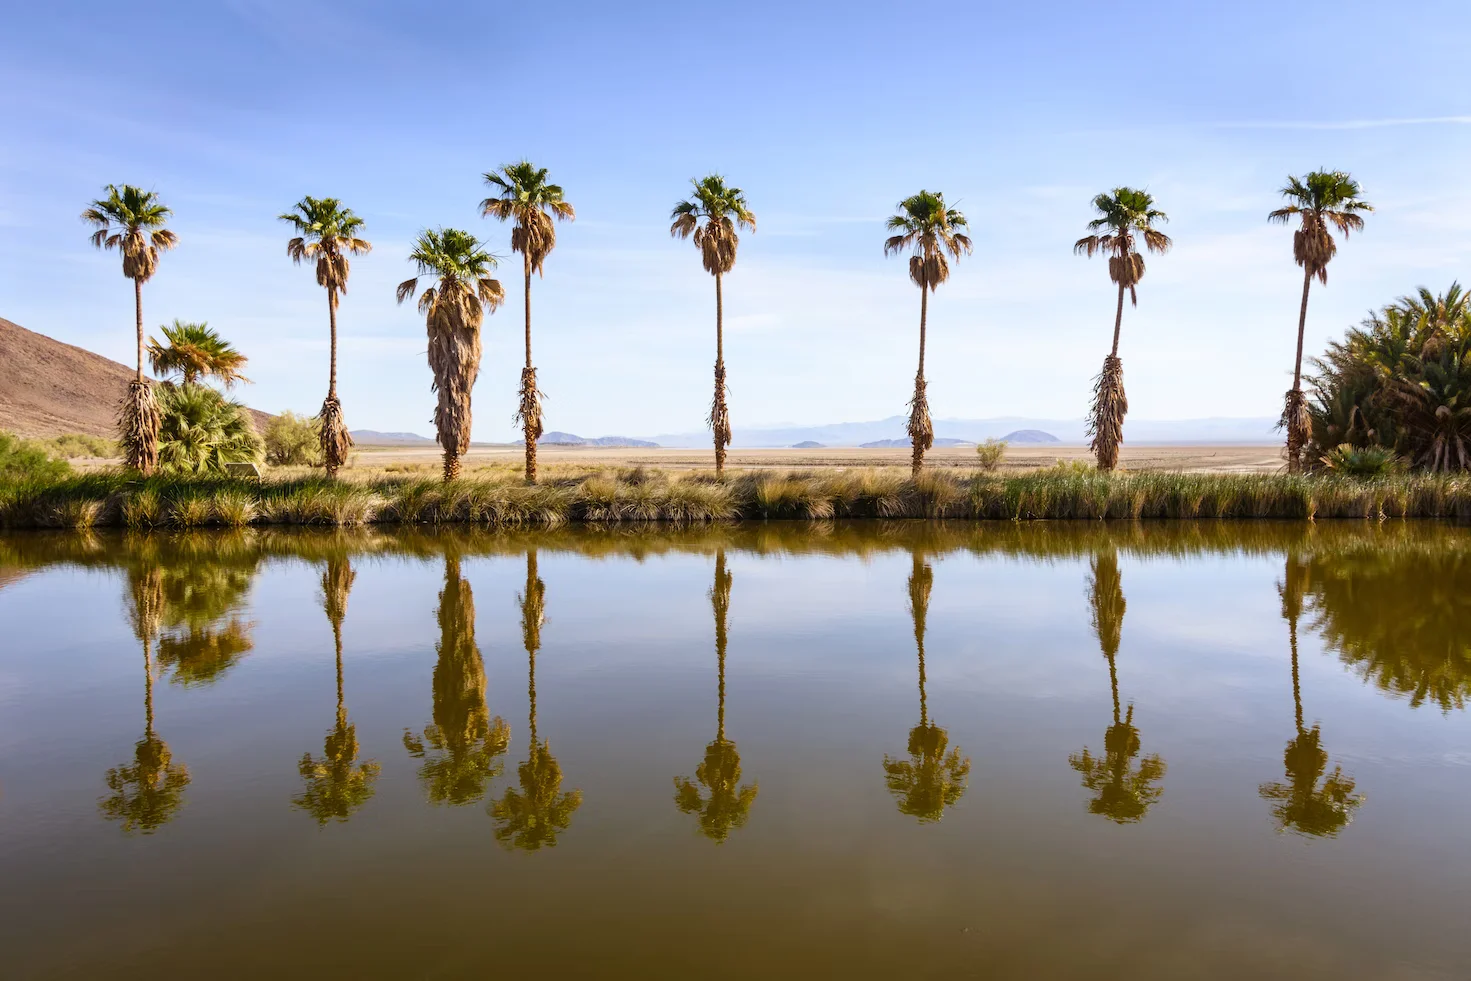 An oasis in Zzyzx, CA (formerly Soda Springs). Image by Steve H. 